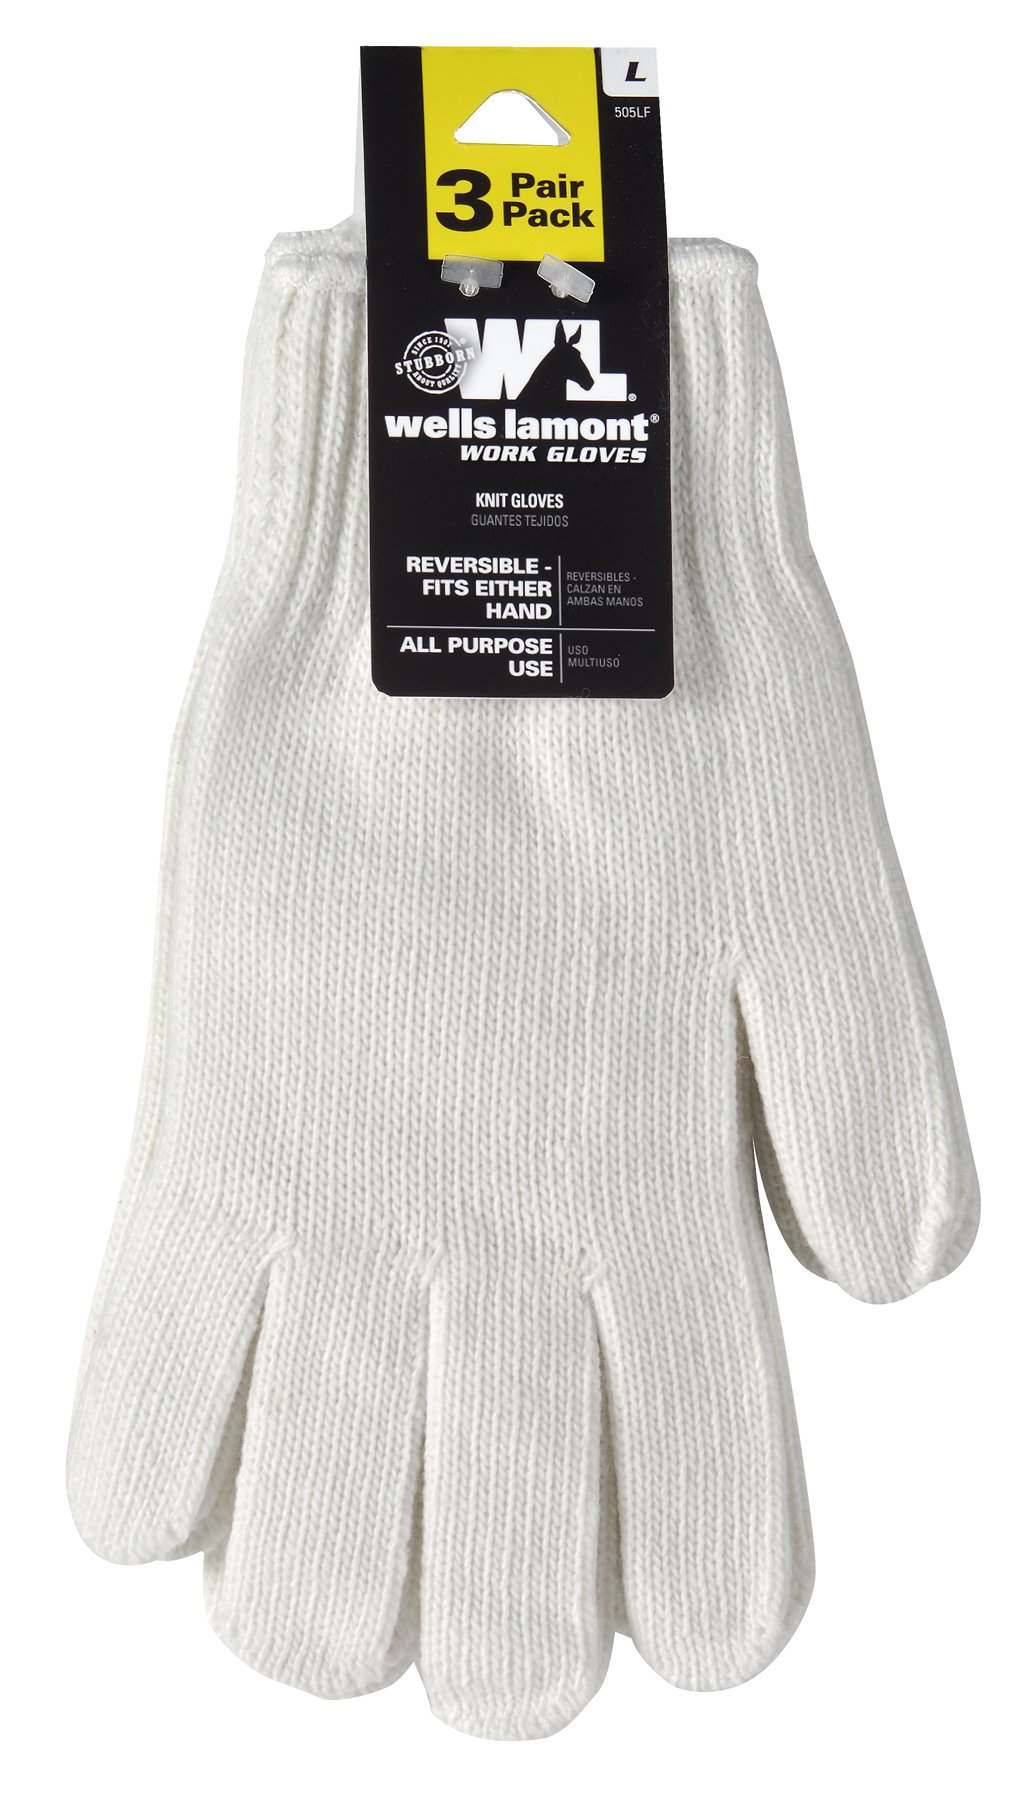 3-Pack Wells Lamont Polyester Work Gloves (Large, White) $1.62 + Free Shipping w/ Prime or on $35+